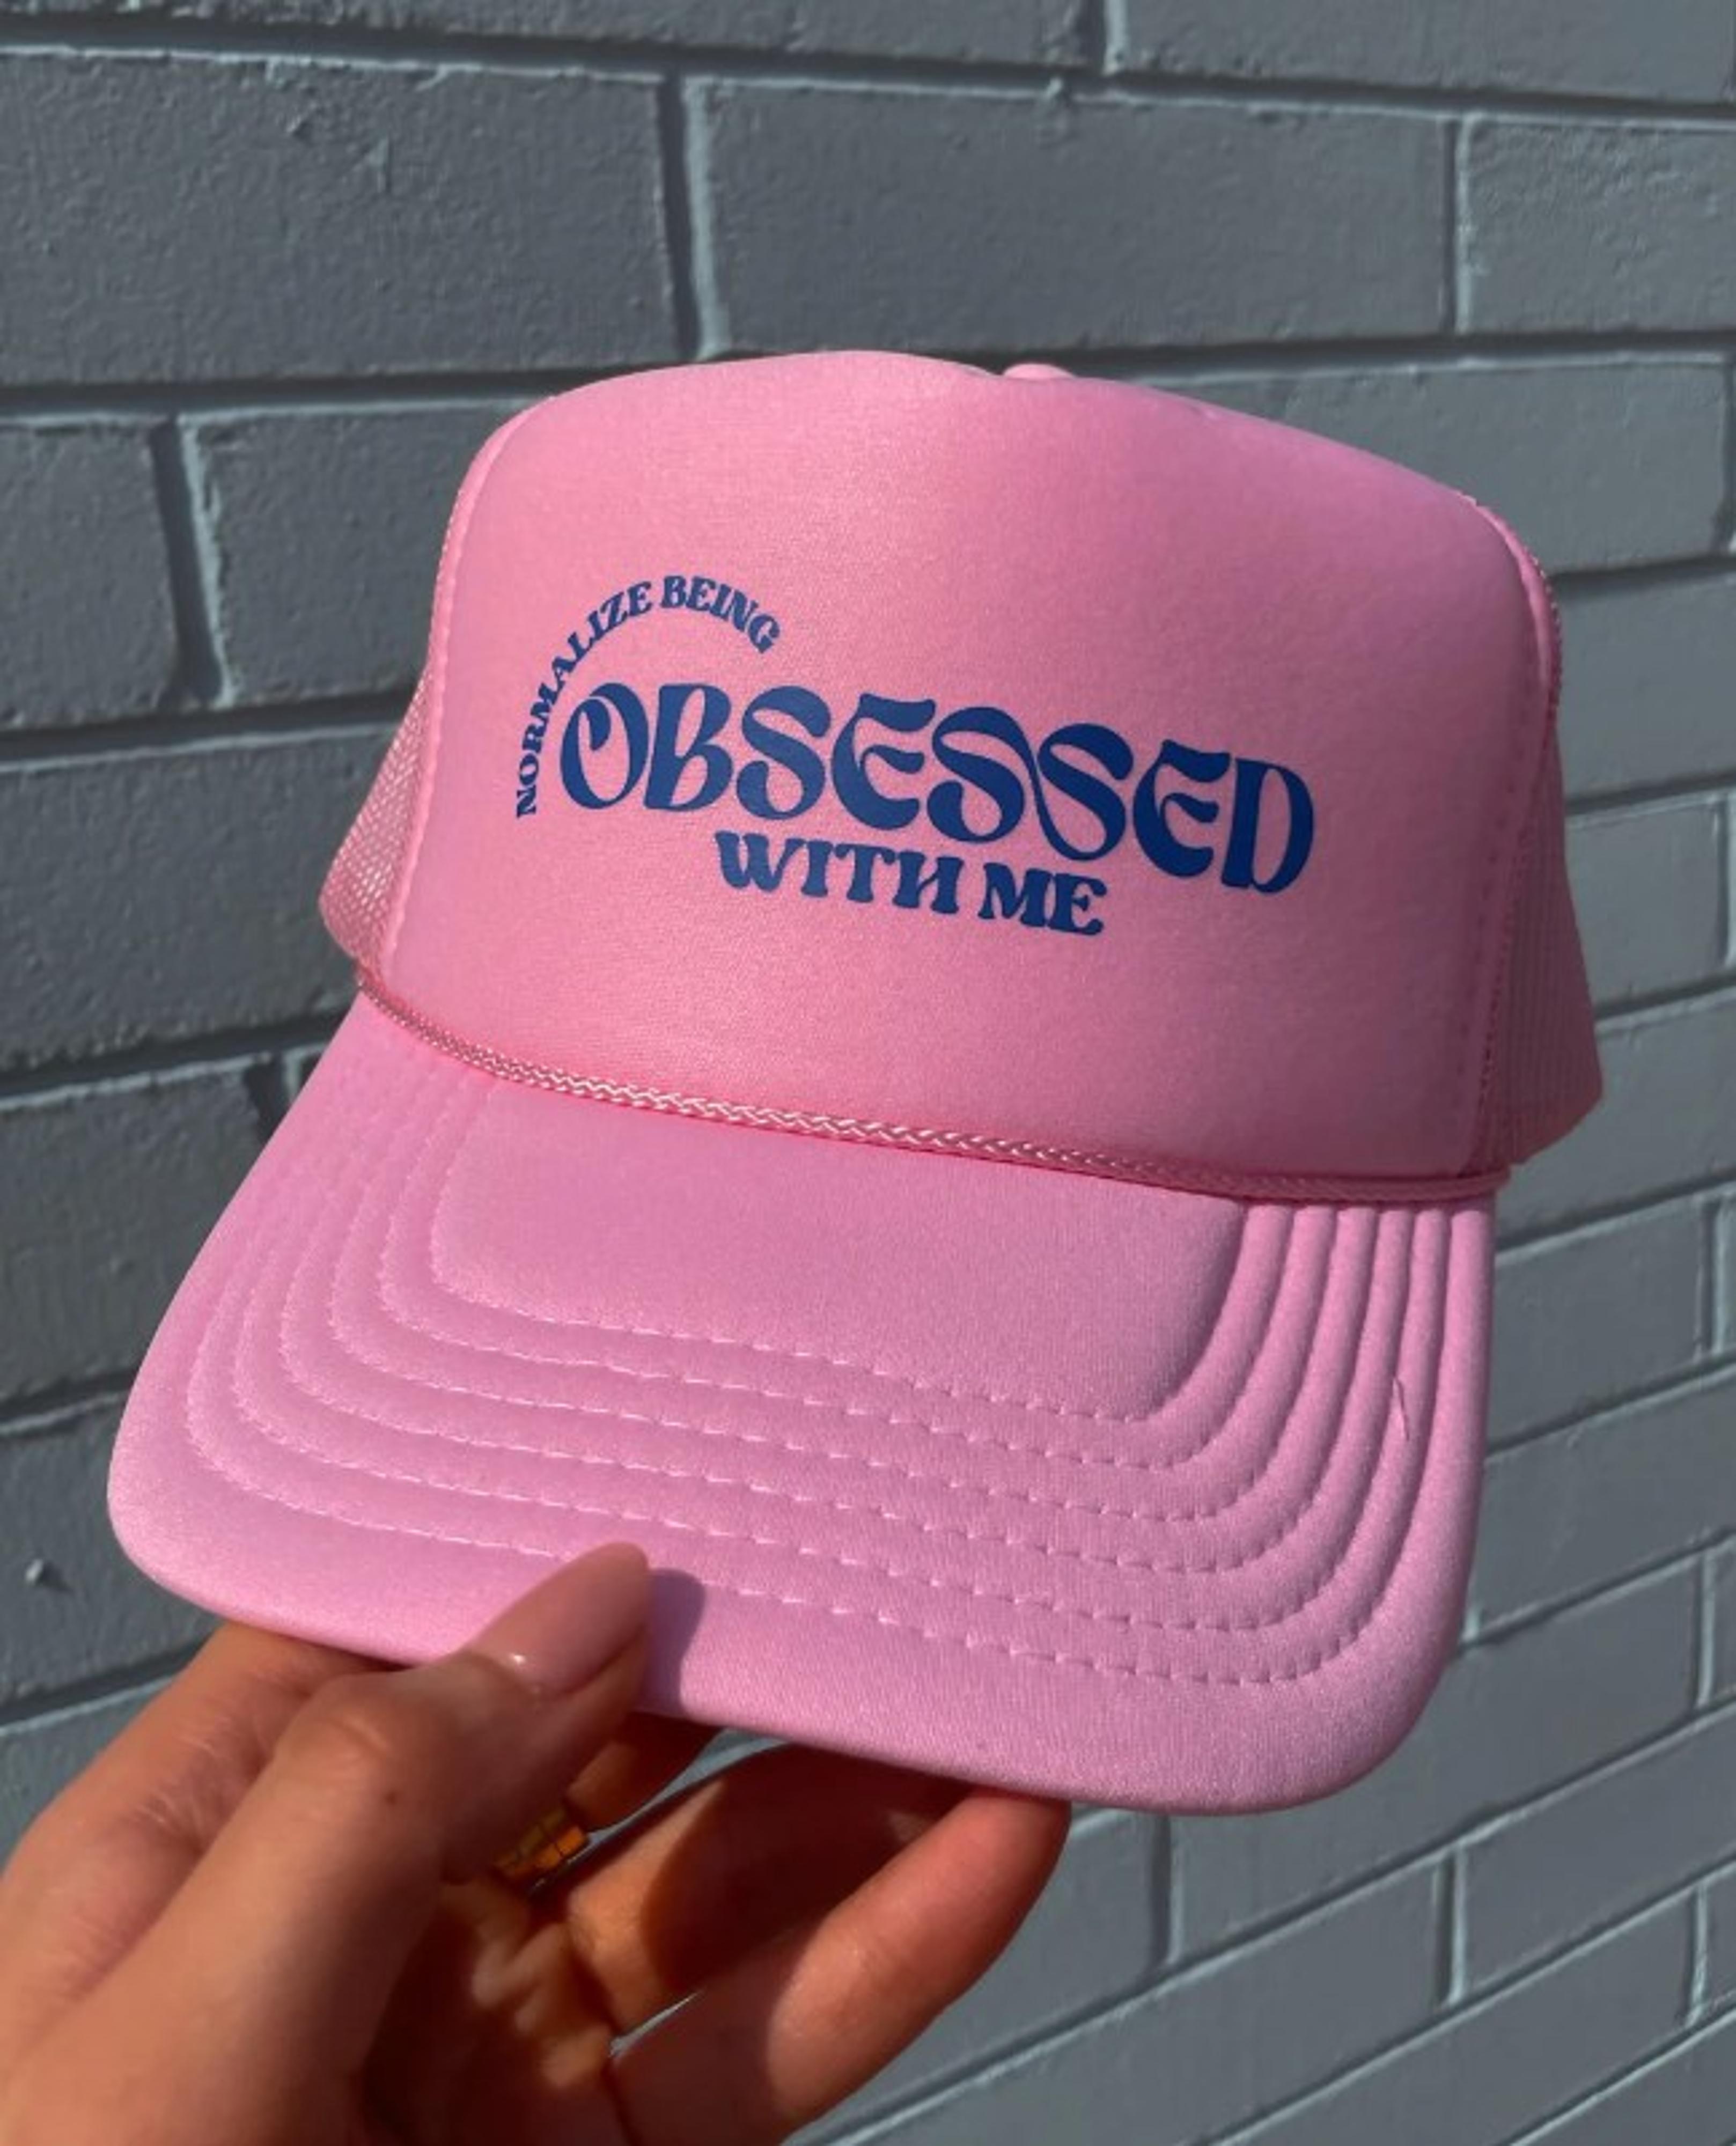  Be Obsessed With Me Trucker Hat